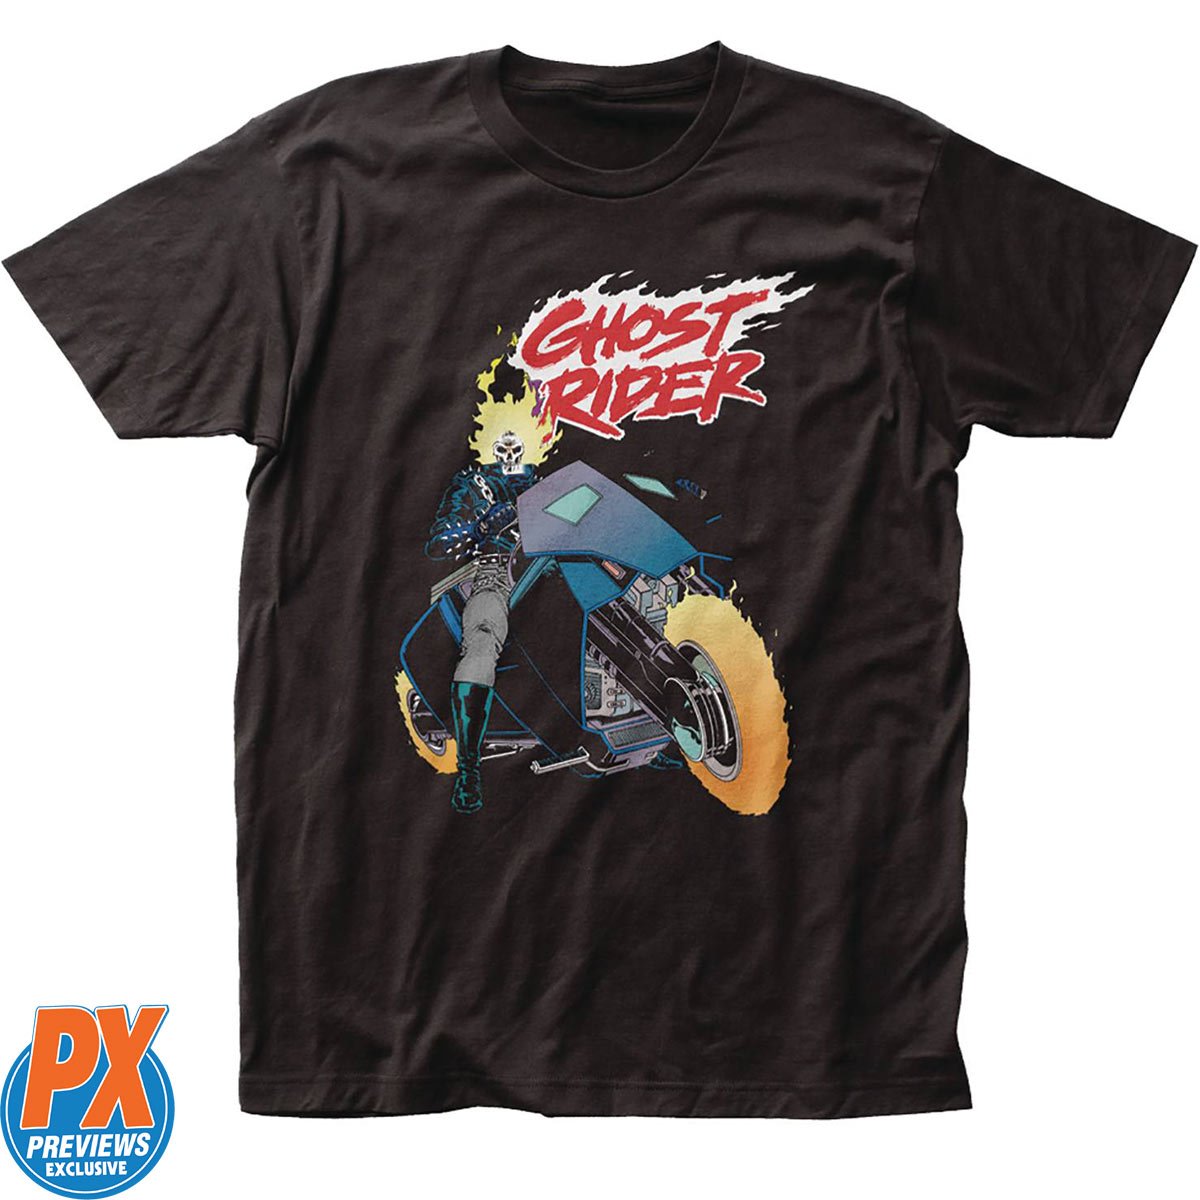 Marvel Ghost Rider (1990) #1 Bike Black T-Shirt - Previews Exclusive